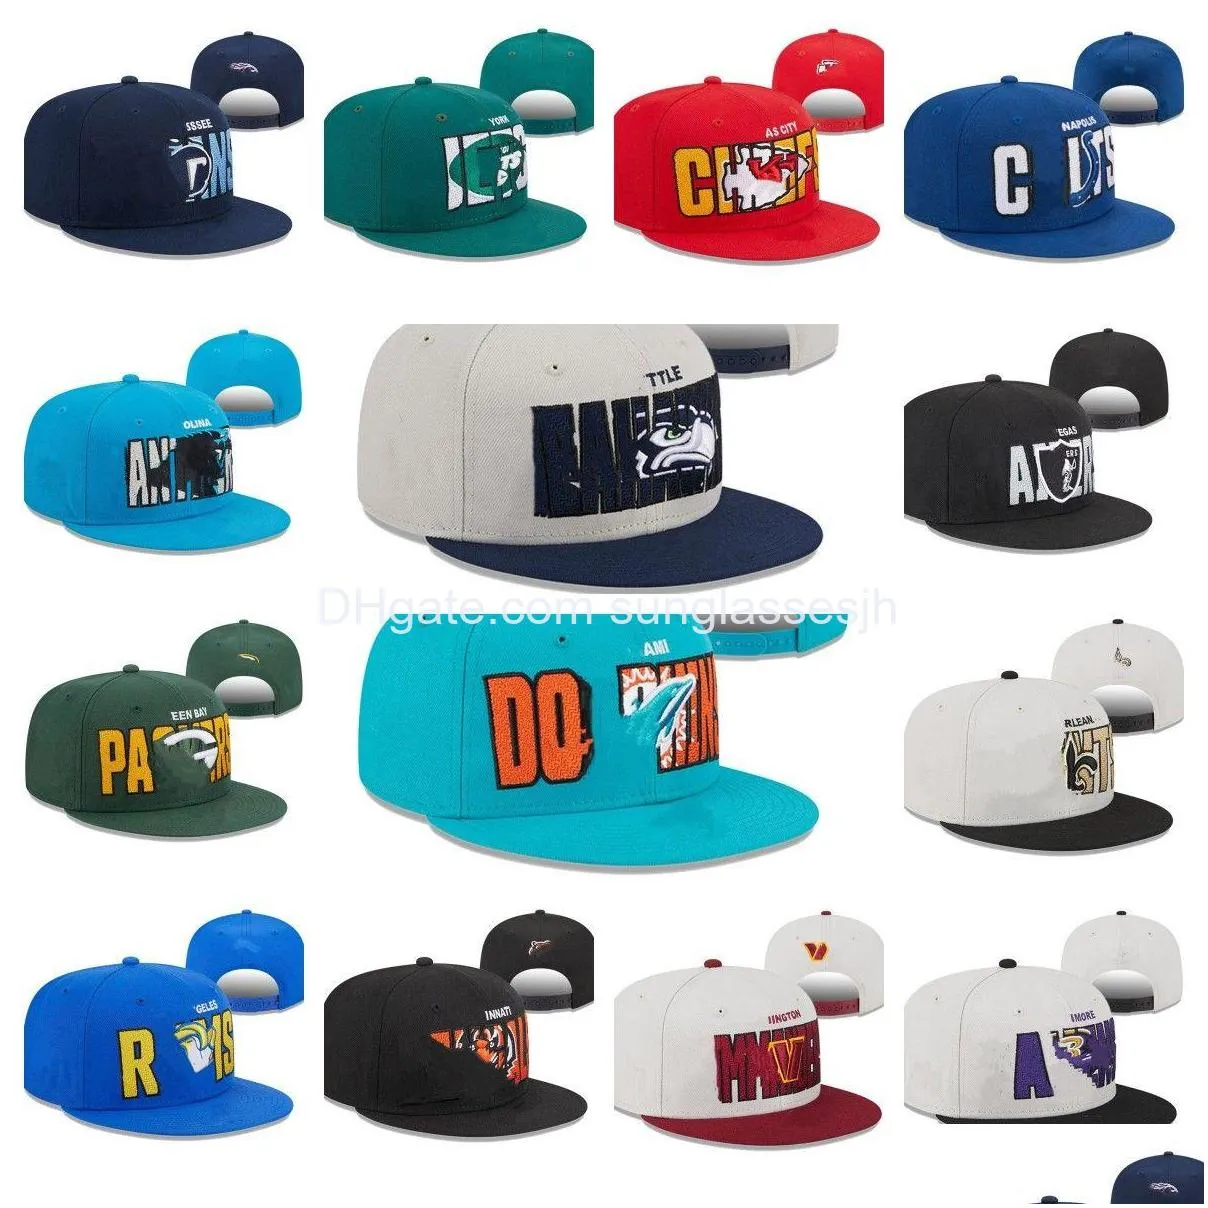 Ball Caps 2023 Adt Snapbacks Hats Fitted Designer Hat All Team Flat Football Basketball Adjustable Cap Embroidery Baseball Mesh Dh6rm